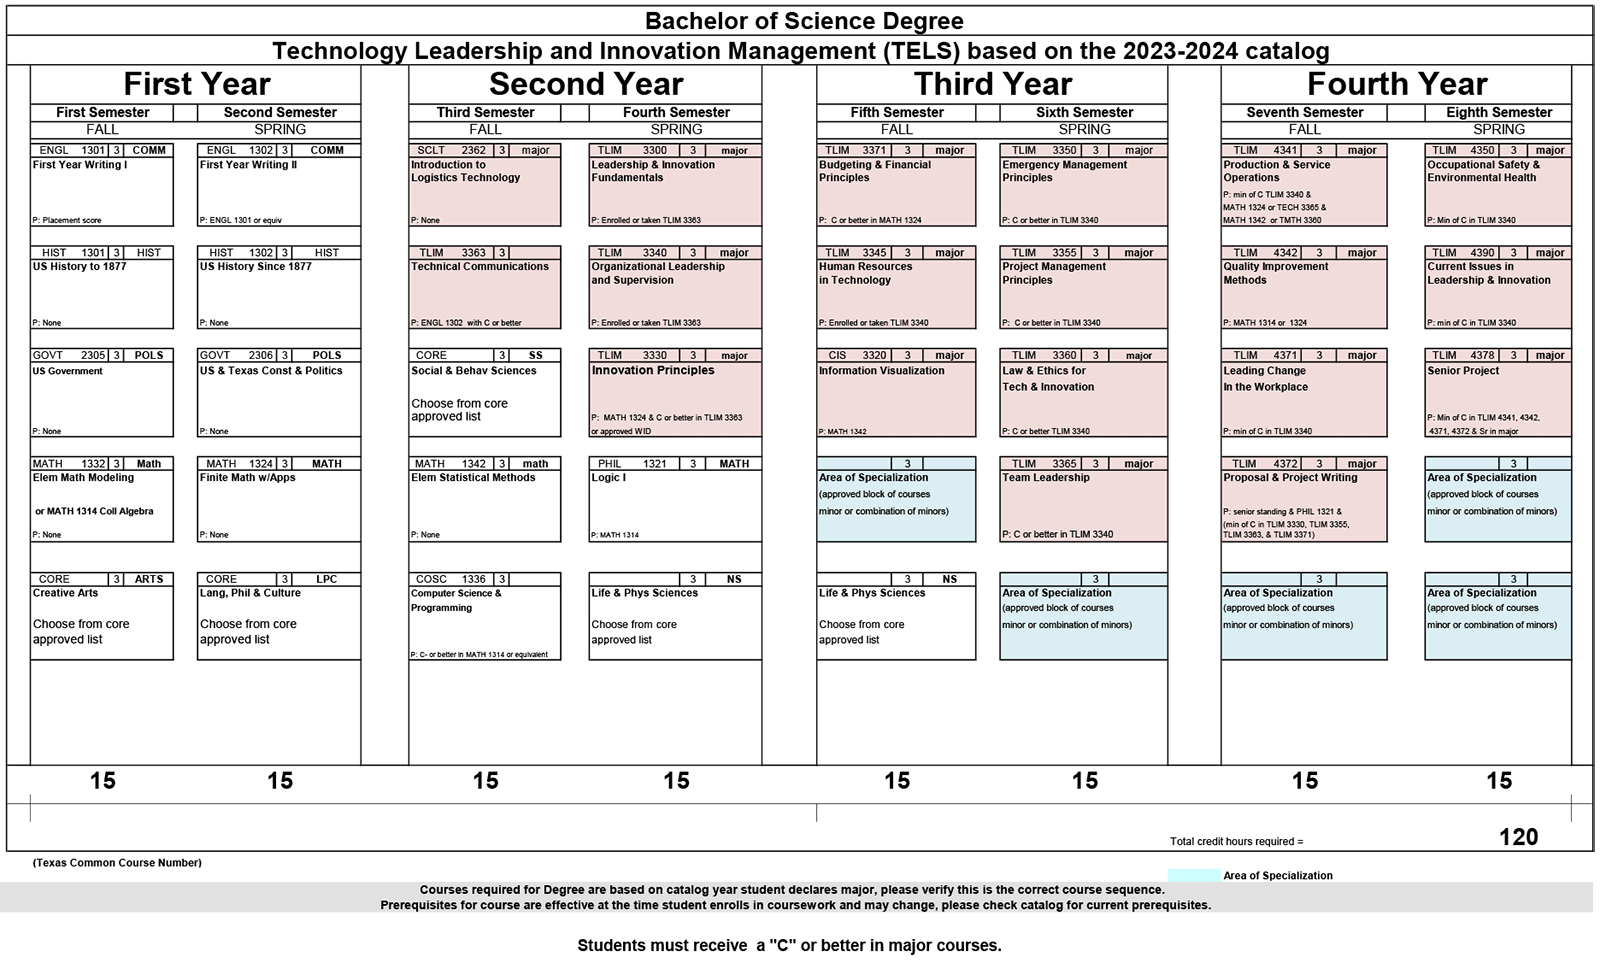 Technology Leadership and Innovation Management Course Sequence